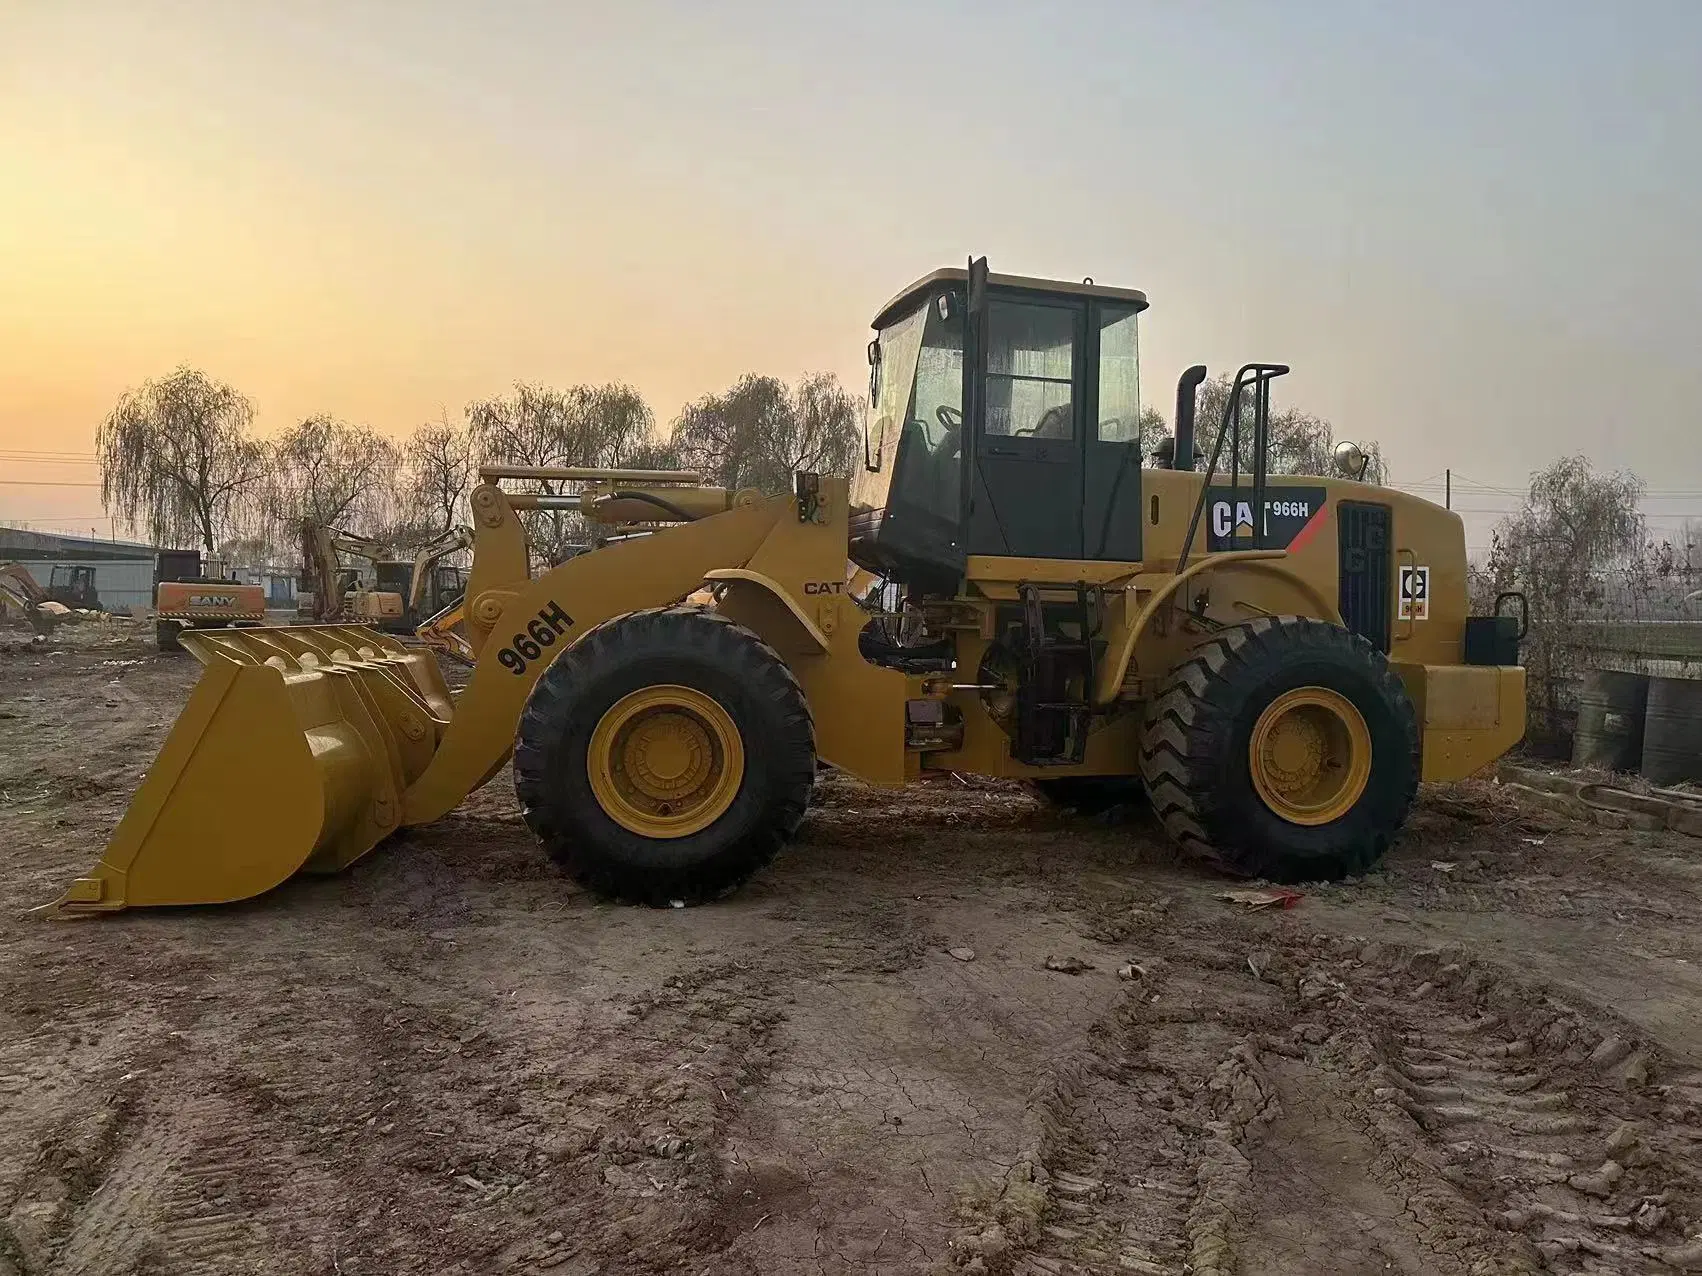 Used caterpillar Wheel Loader Cat 966h for Sale